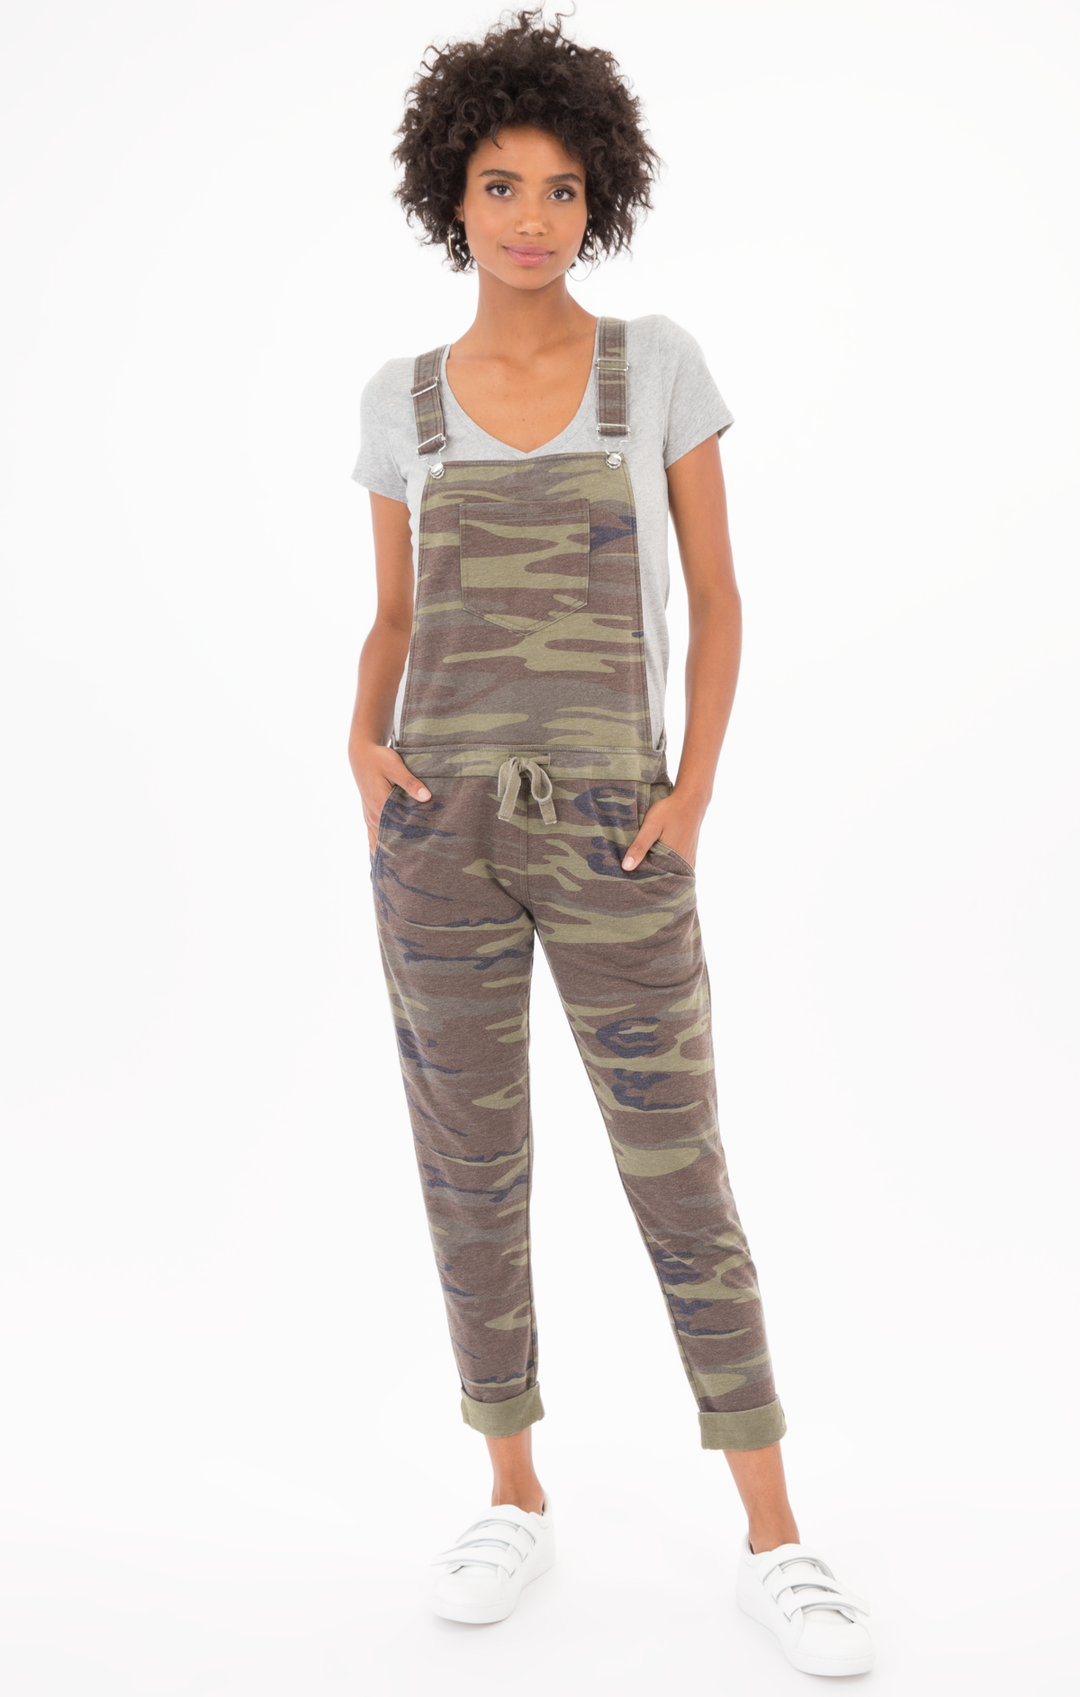 The Overalls | Camo Green - West of Camden - Main Image Number 1 of 3